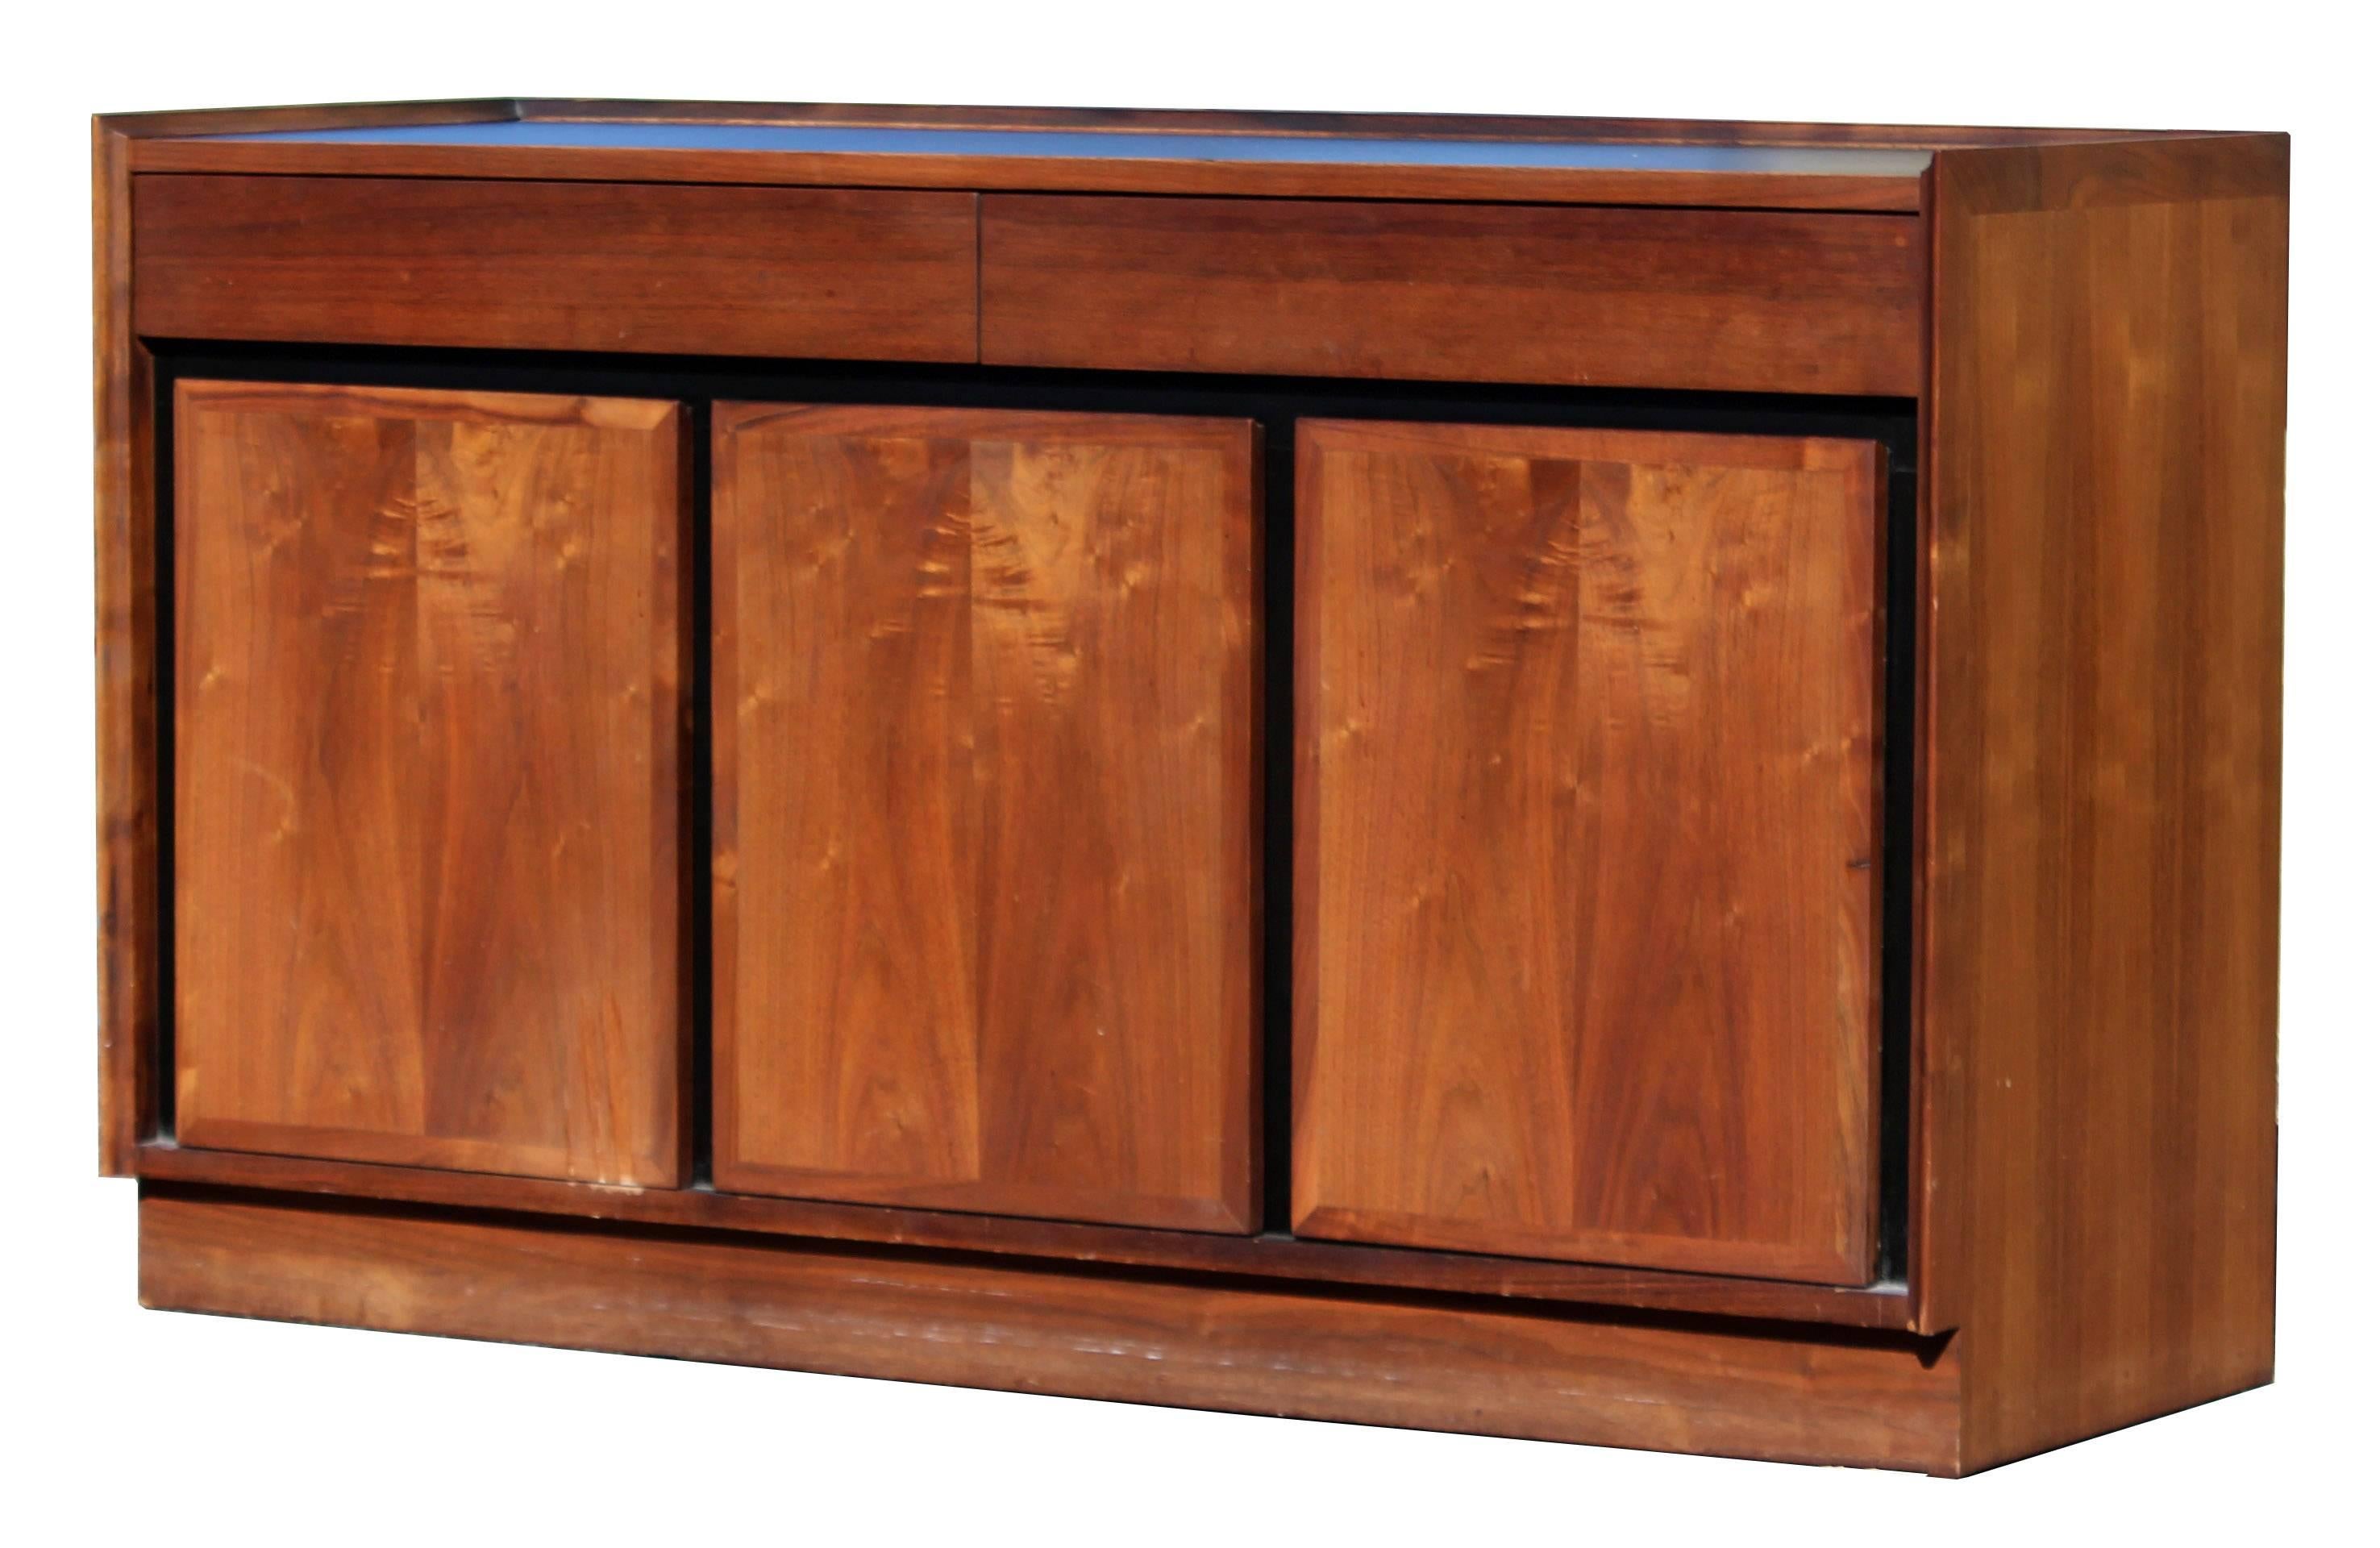 For your consideration is a lovely, walnut, credenza sideboard, with three drawers, by Merton Gershun for Dillingham, circa 1970s. In excellent condition. The dimensions are 52